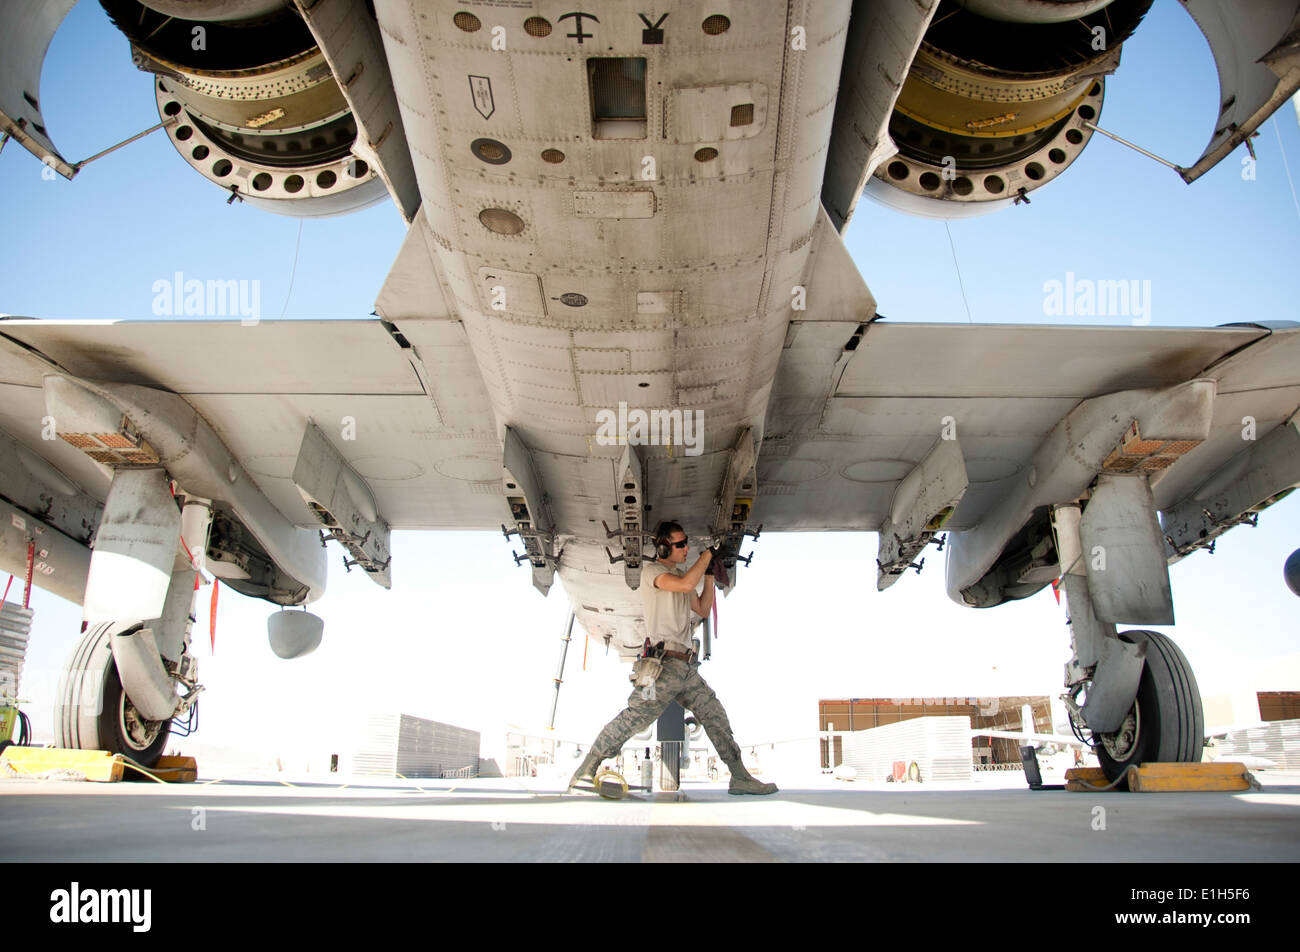 U.S. Air Force Senior Airman Steve Roeper, a weapons technician with the 107th Expeditionary Fighter Squadron, inspects and cle Stock Photo